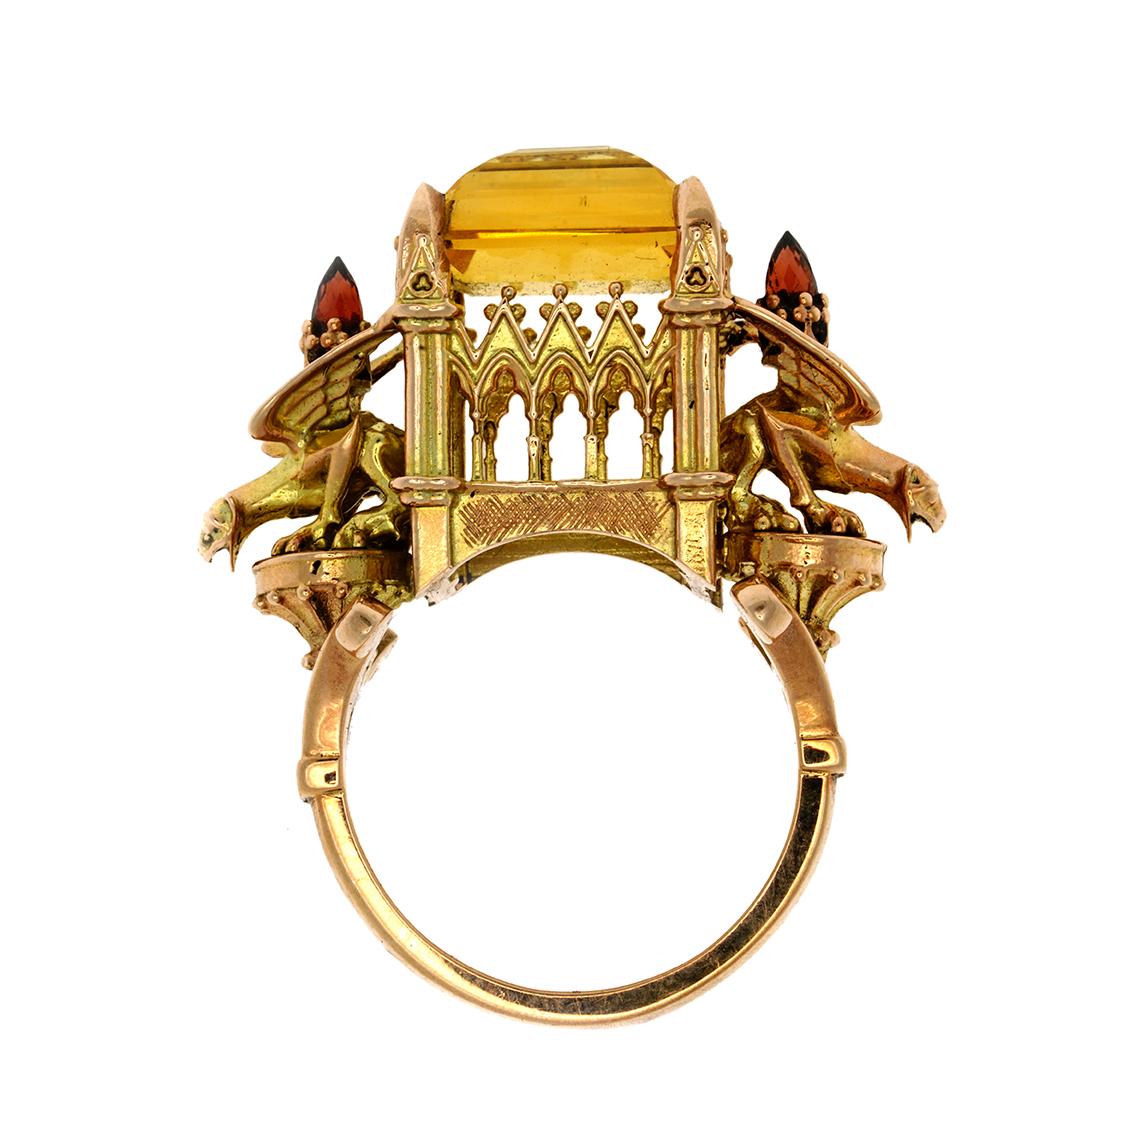 William Llewellyn Griffiths 9 Karat Gold Citrin Euphoric Triumph Kathedrale Ring 1